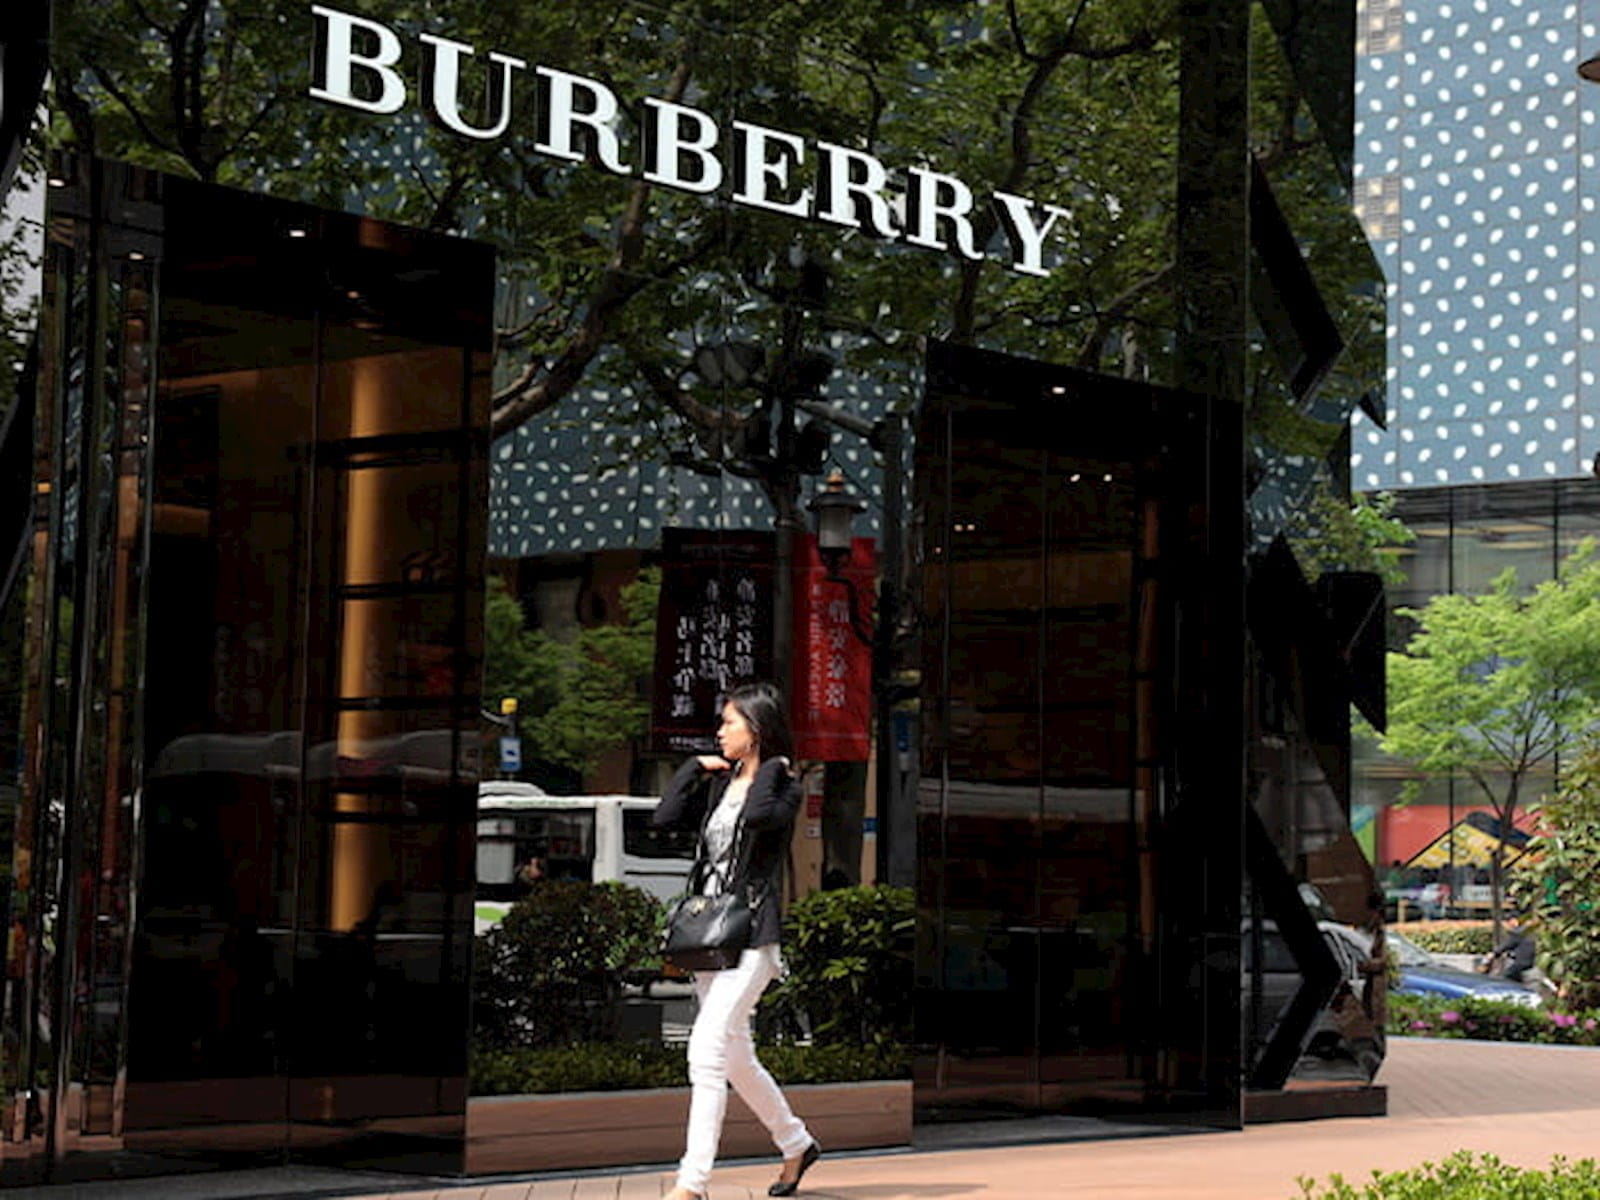 Burberry store front high street retail shop fashion designer ICAEW By All Accounts